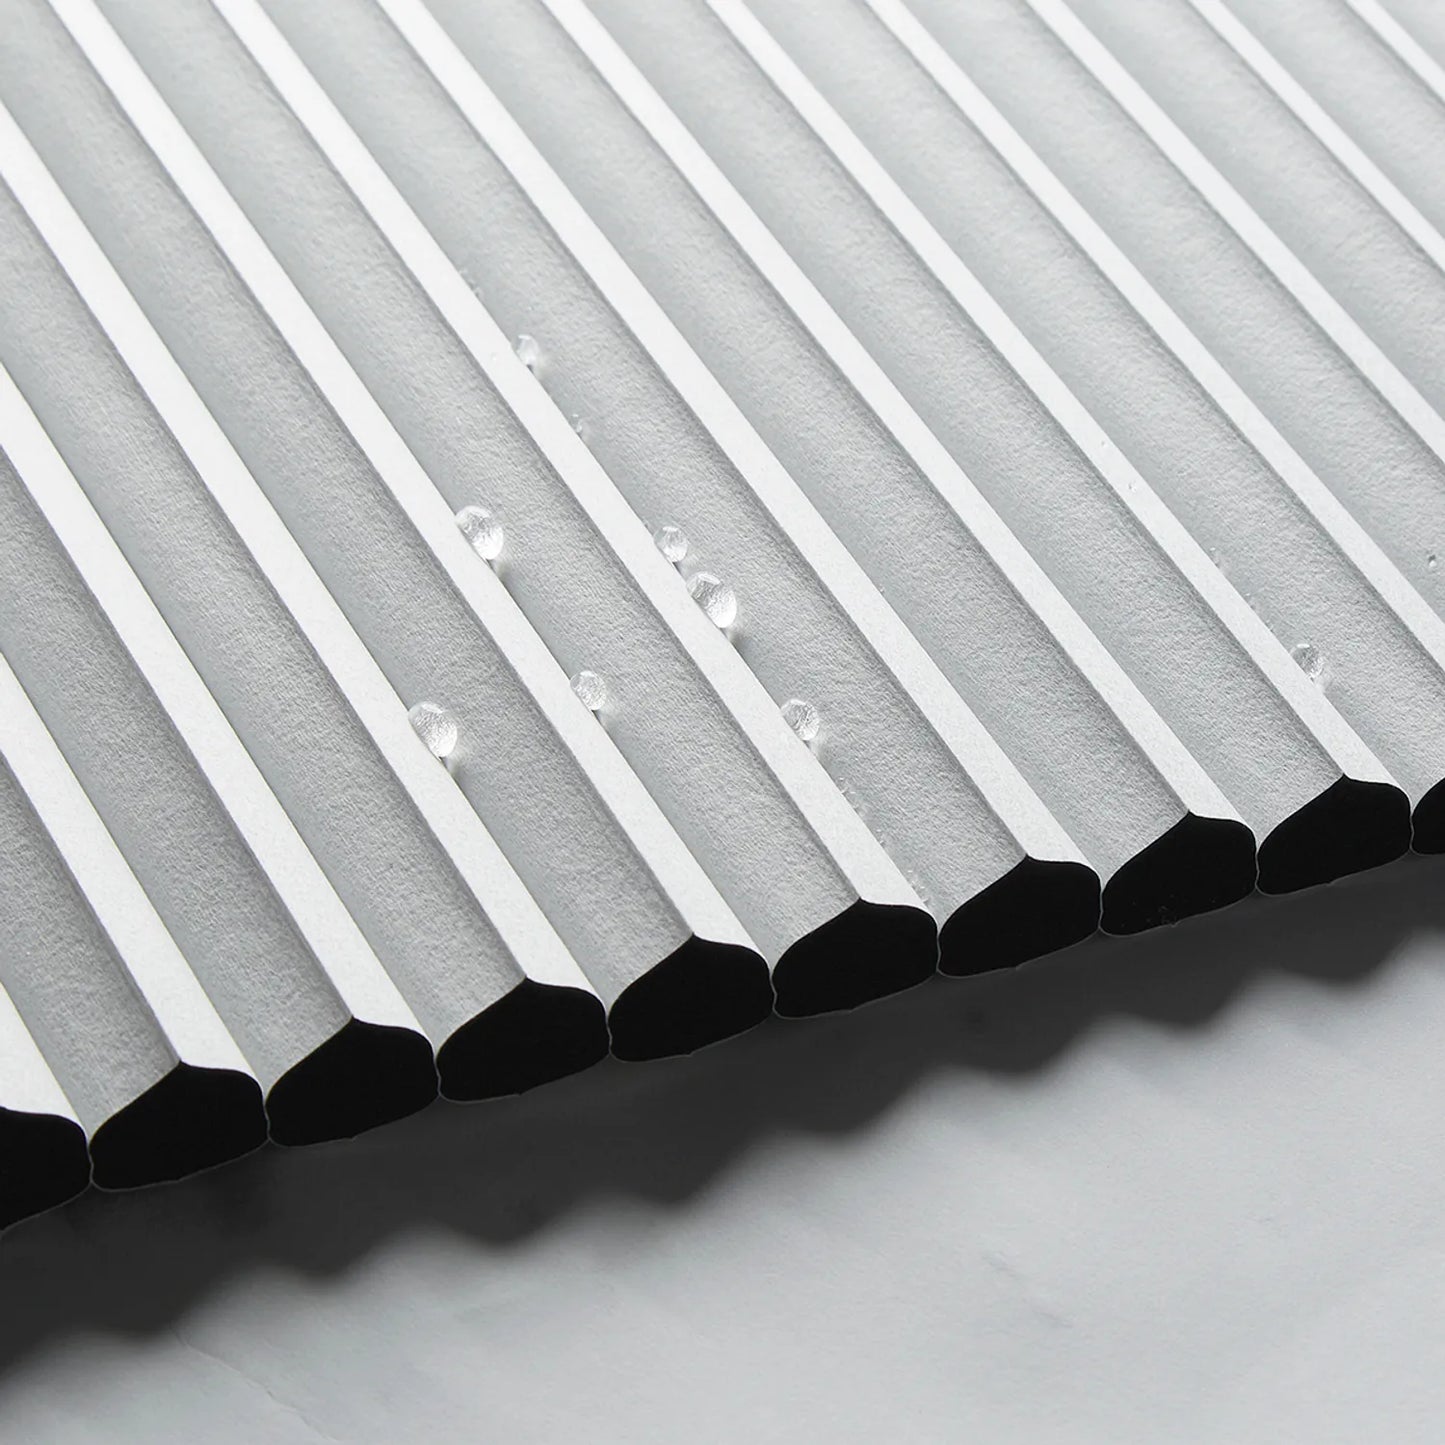 Close-up of white waterproof honeycomb blind with water droplets, showcasing high-quality cellular structure and ultrasonic precision edges